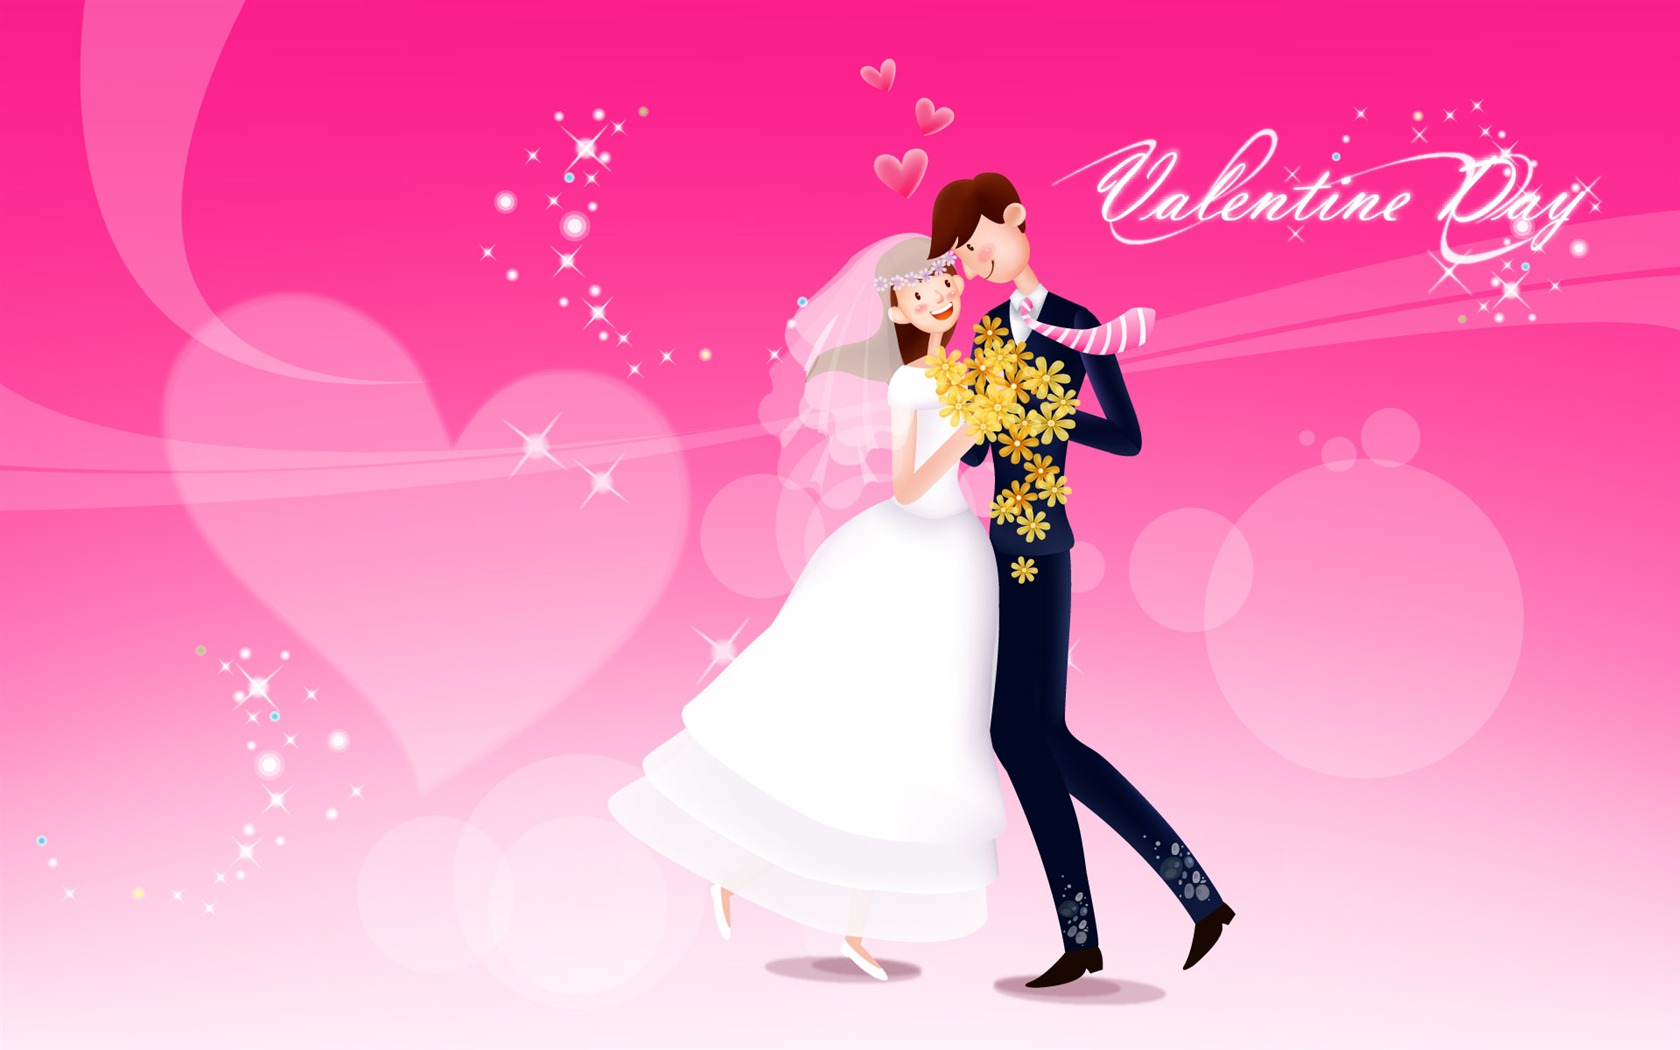 Valentine's Day Theme Wallpapers (2) #16 - 1680x1050